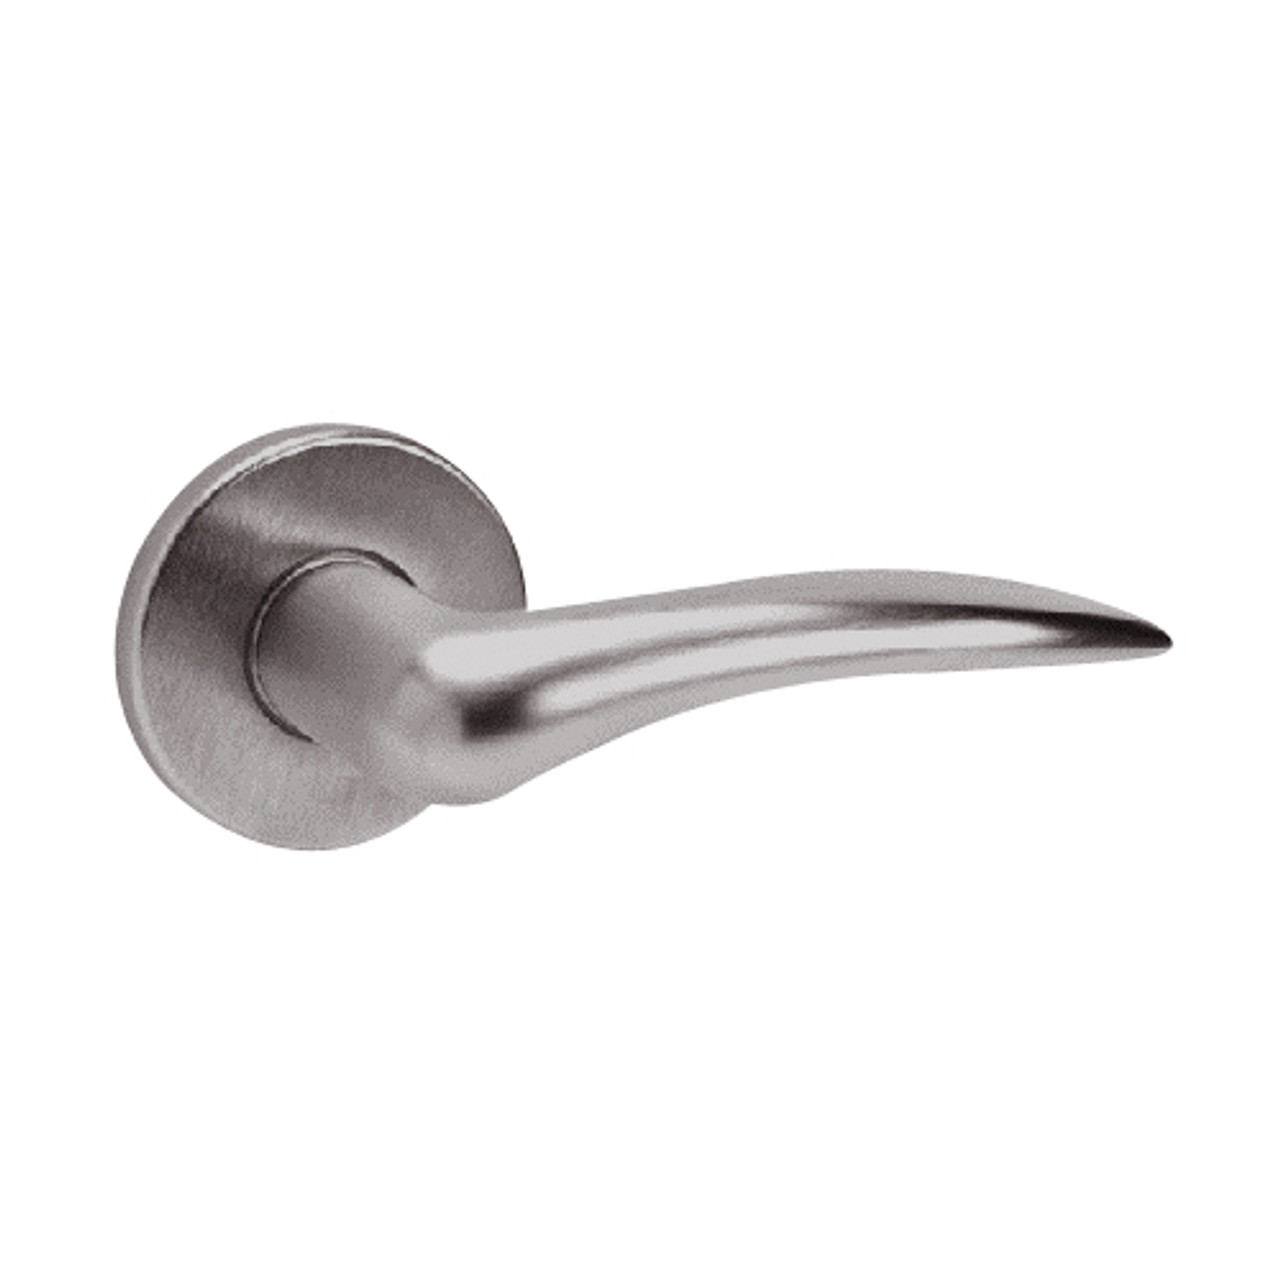 ML2054-DSA-630-M31-LH Corbin Russwin ML2000 Series Mortise Entrance Trim Pack with Dirke Lever in Satin Stainless